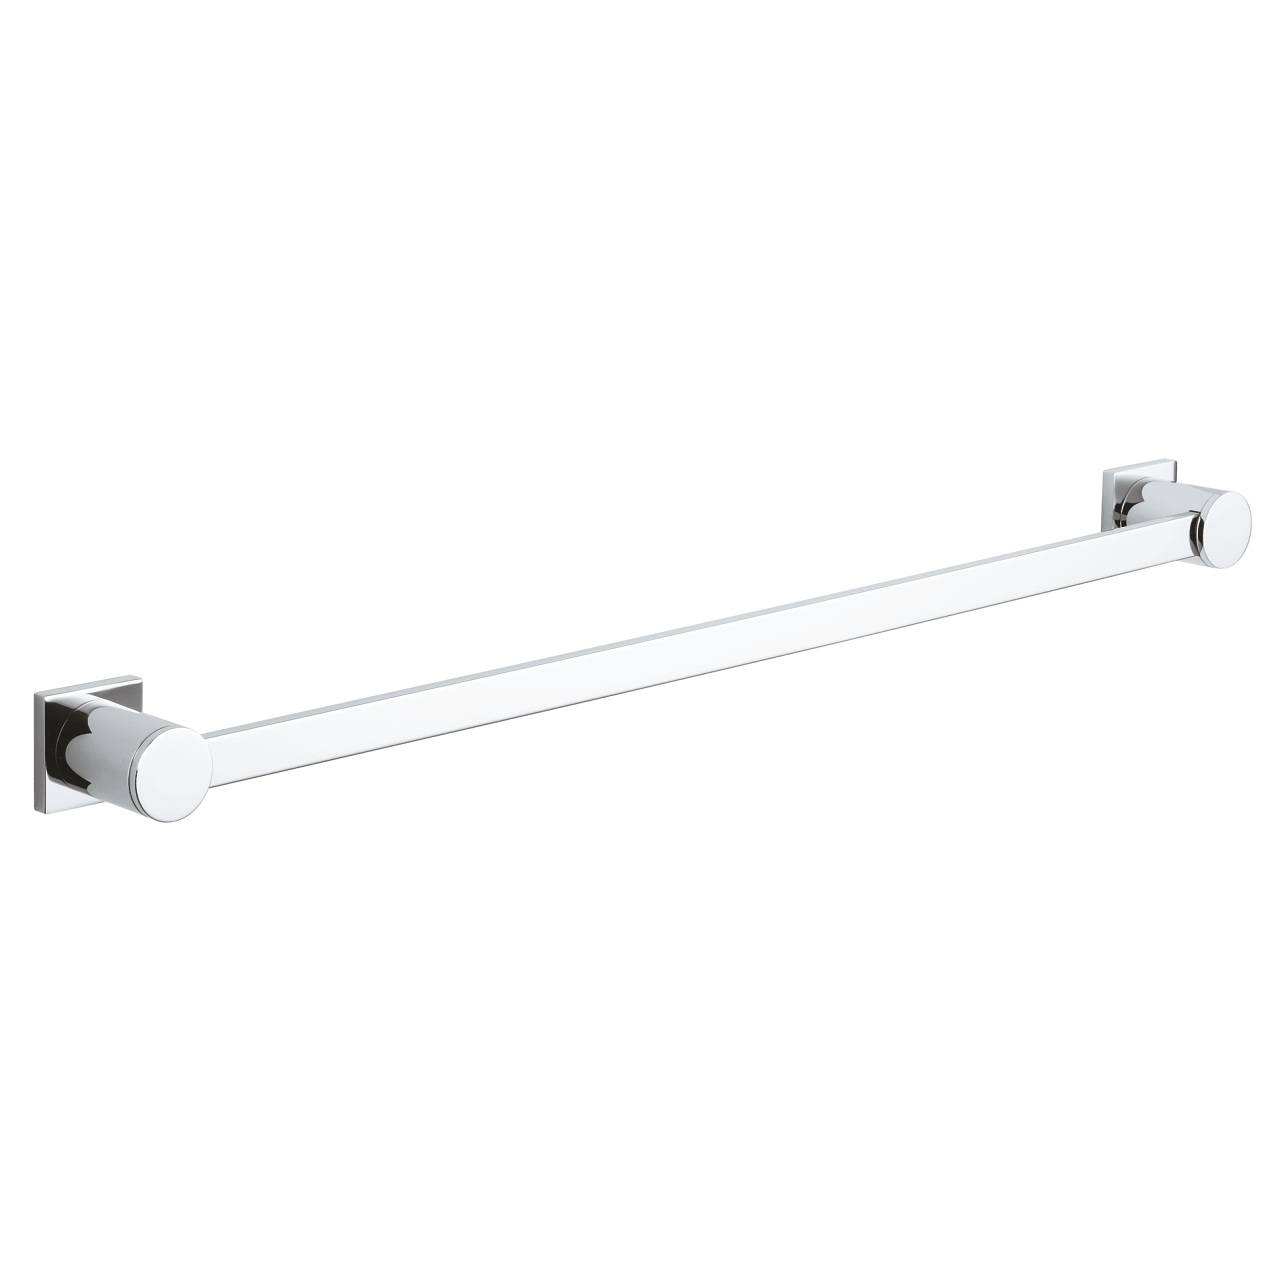 Thanh treo khăn Allure 646mm Grohe 40341000